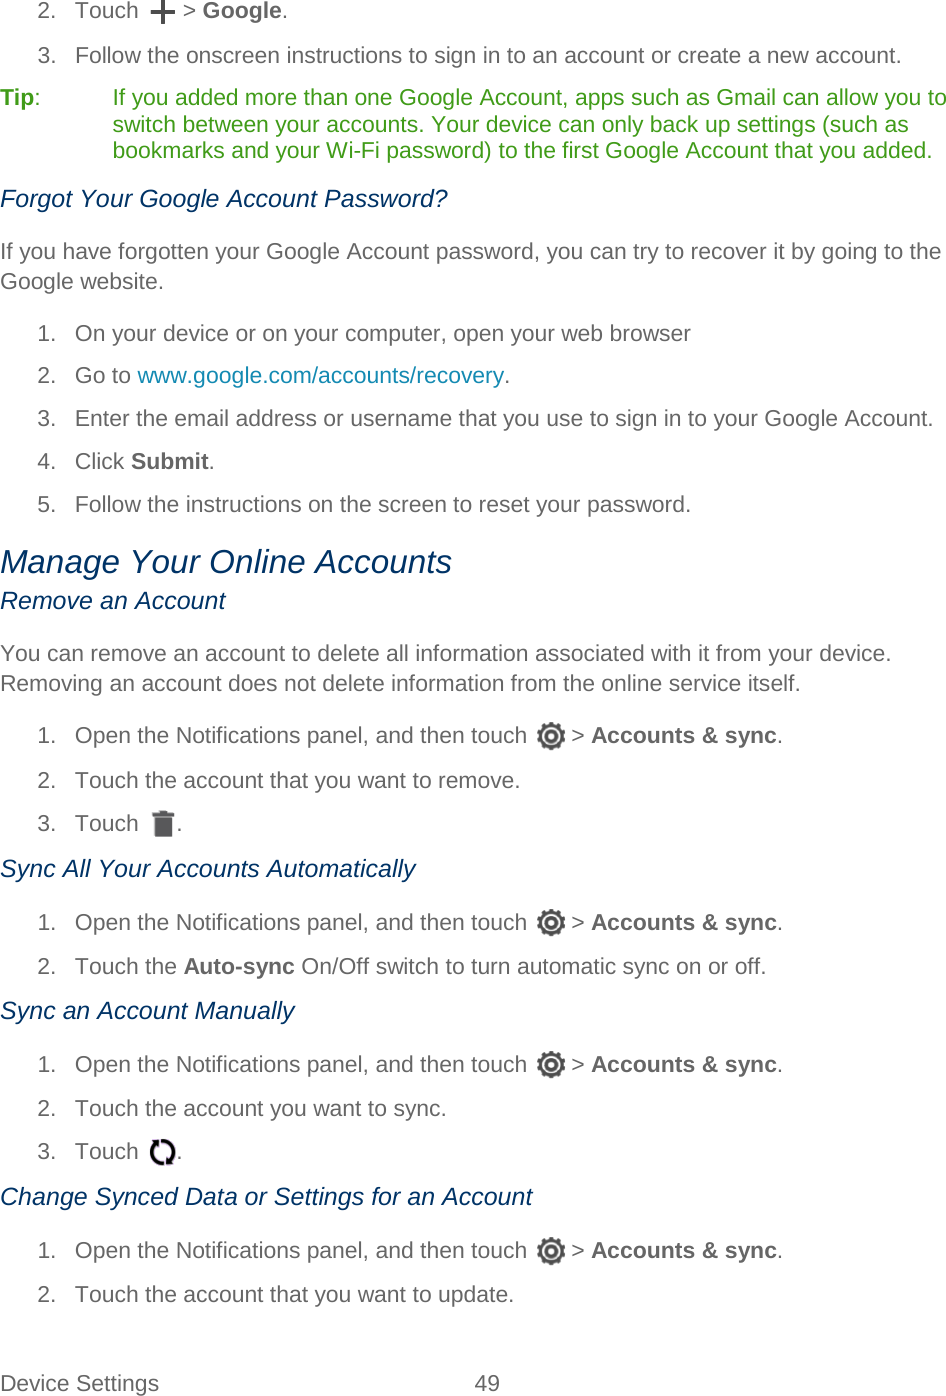  Device Settings 49   2. Touch   &gt; Google. 3. Follow the onscreen instructions to sign in to an account or create a new account. Tip:  If you added more than one Google Account, apps such as Gmail can allow you to switch between your accounts. Your device can only back up settings (such as bookmarks and your Wi-Fi password) to the first Google Account that you added. Forgot Your Google Account Password? If you have forgotten your Google Account password, you can try to recover it by going to the Google website. 1. On your device or on your computer, open your web browser 2. Go to www.google.com/accounts/recovery. 3. Enter the email address or username that you use to sign in to your Google Account. 4. Click Submit. 5. Follow the instructions on the screen to reset your password. Manage Your Online Accounts Remove an Account You can remove an account to delete all information associated with it from your device. Removing an account does not delete information from the online service itself. 1. Open the Notifications panel, and then touch   &gt; Accounts &amp; sync. 2. Touch the account that you want to remove. 3. Touch  . Sync All Your Accounts Automatically 1. Open the Notifications panel, and then touch   &gt; Accounts &amp; sync. 2. Touch the Auto-sync On/Off switch to turn automatic sync on or off. Sync an Account Manually 1. Open the Notifications panel, and then touch   &gt; Accounts &amp; sync. 2. Touch the account you want to sync. 3. Touch  . Change Synced Data or Settings for an Account 1. Open the Notifications panel, and then touch   &gt; Accounts &amp; sync. 2. Touch the account that you want to update. 